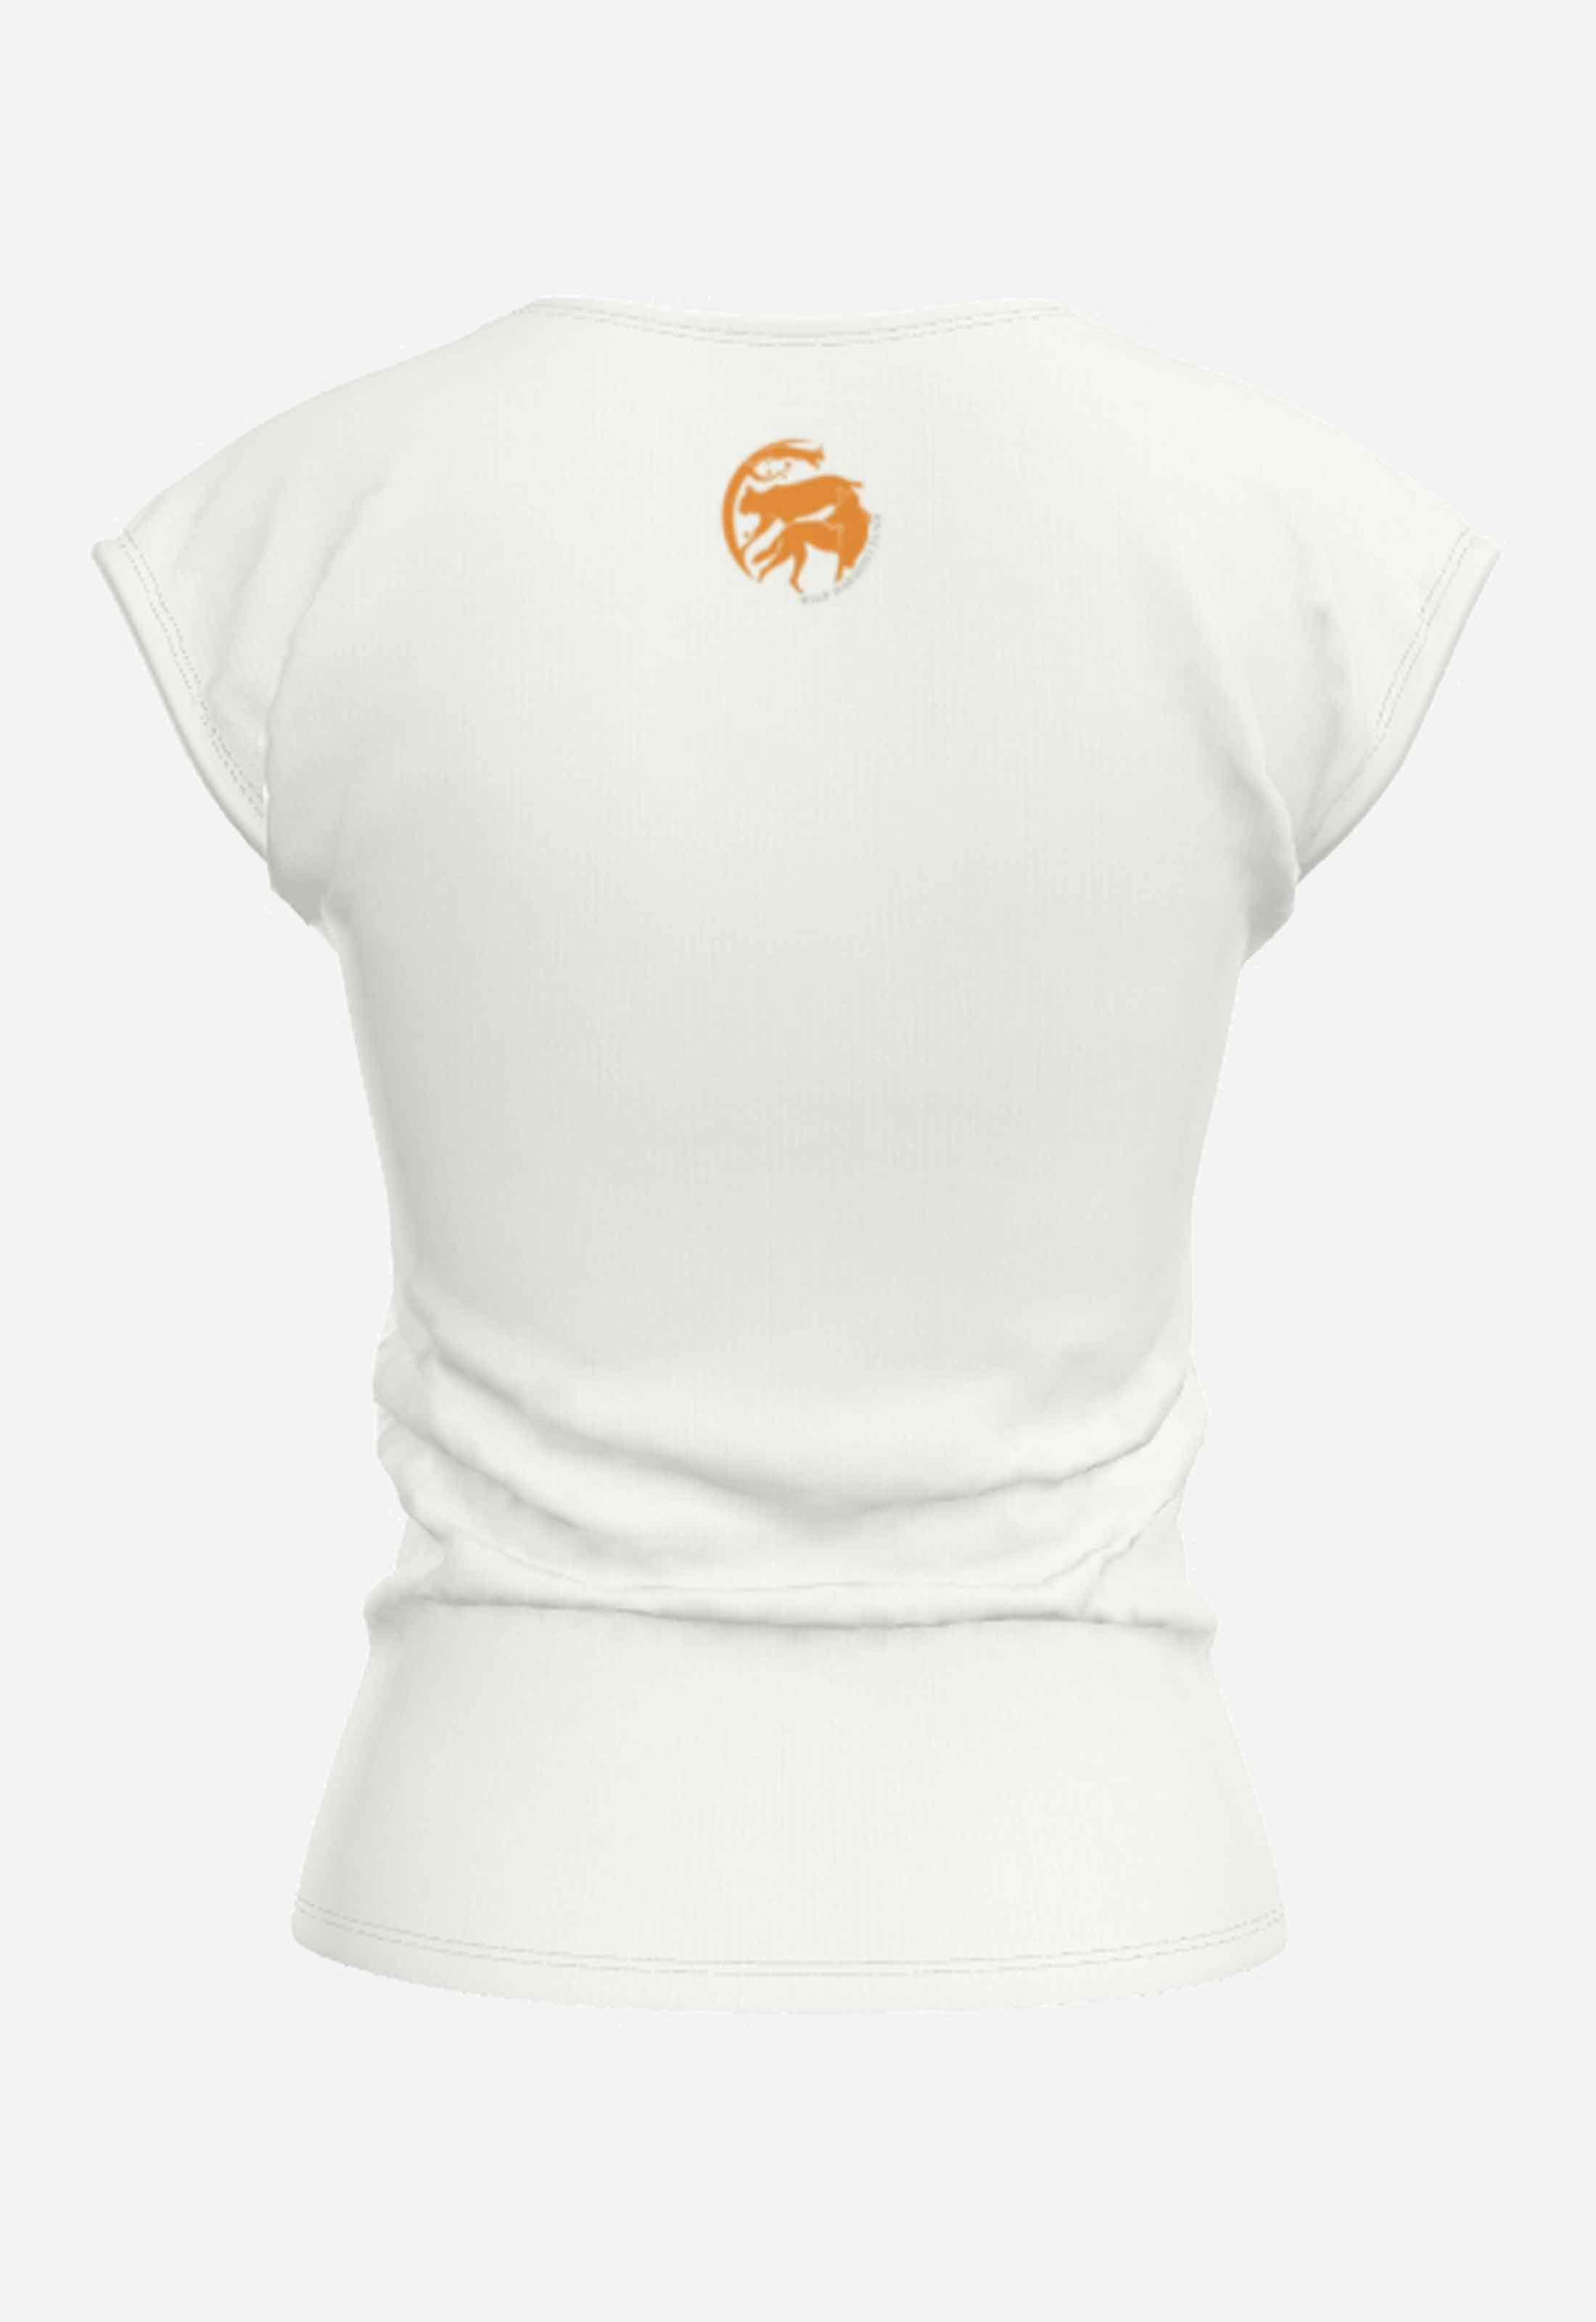 Image 2 for Red Squirrel Women's T-shirt